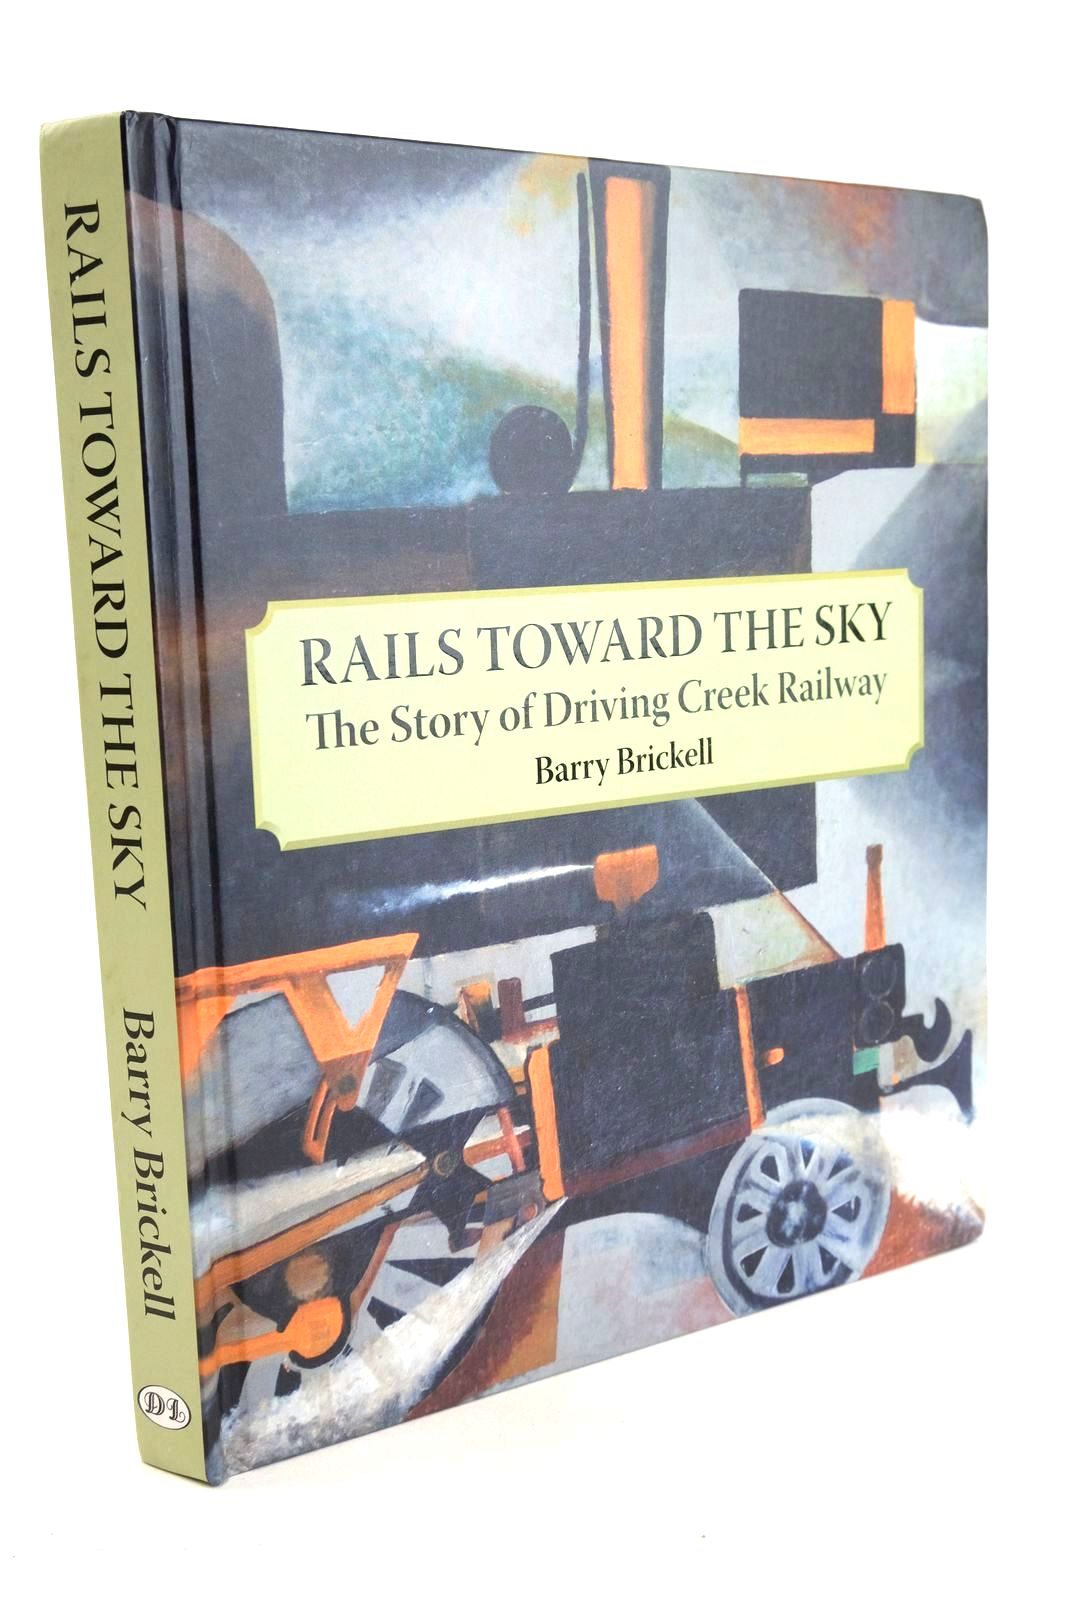 Photo of RAILS TOWARD THE SKY - THE STORY OF DRIVING CREEK RAILWAY written by Brickell, Barry published by David Ling Publishing Limited (STOCK CODE: 1327212)  for sale by Stella & Rose's Books